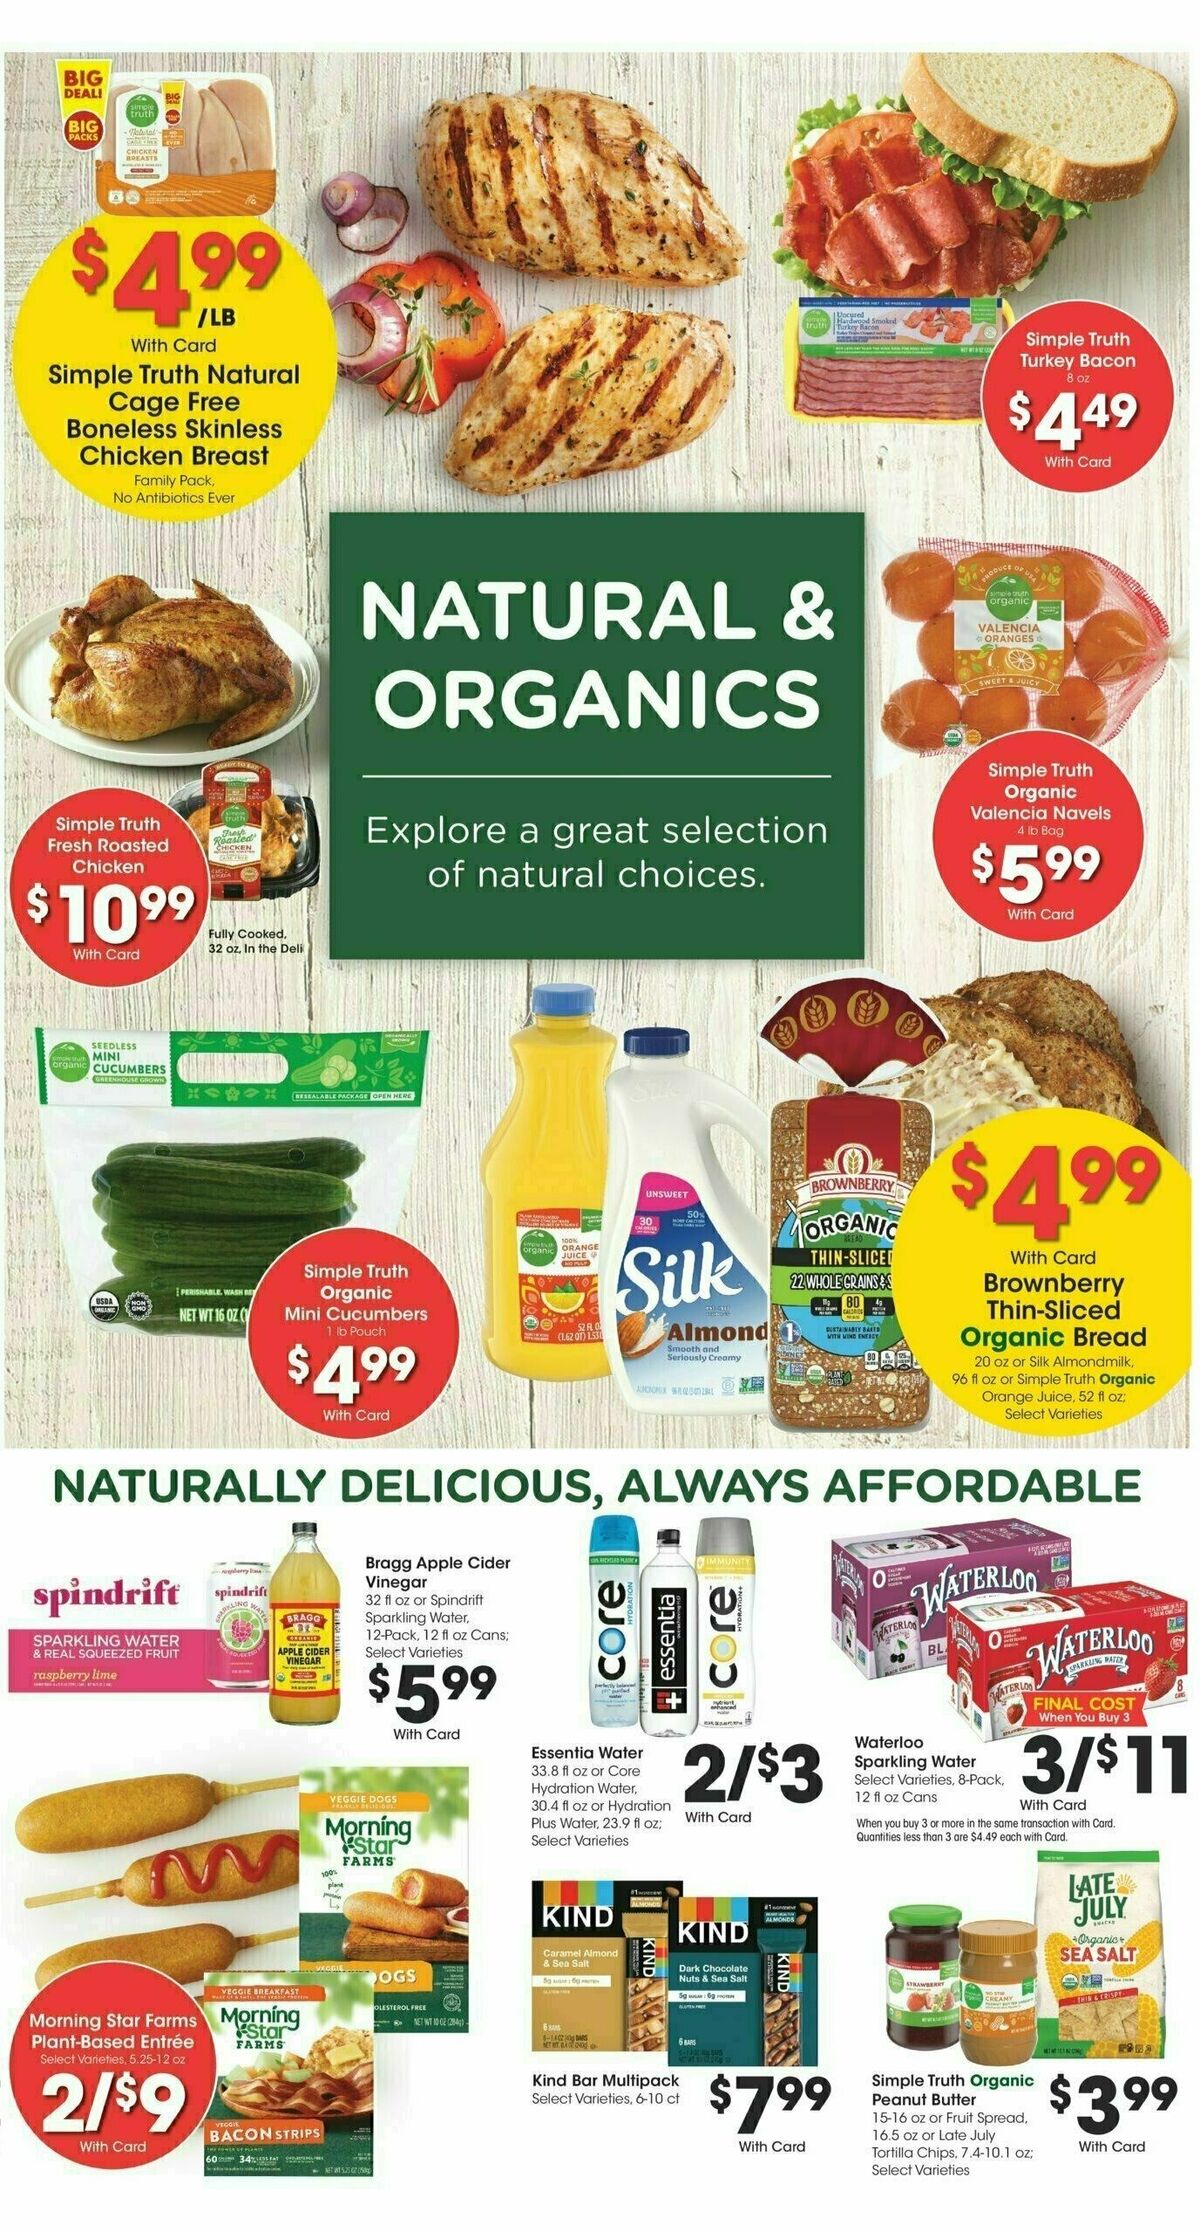 Baker's Weekly Ad from September 6